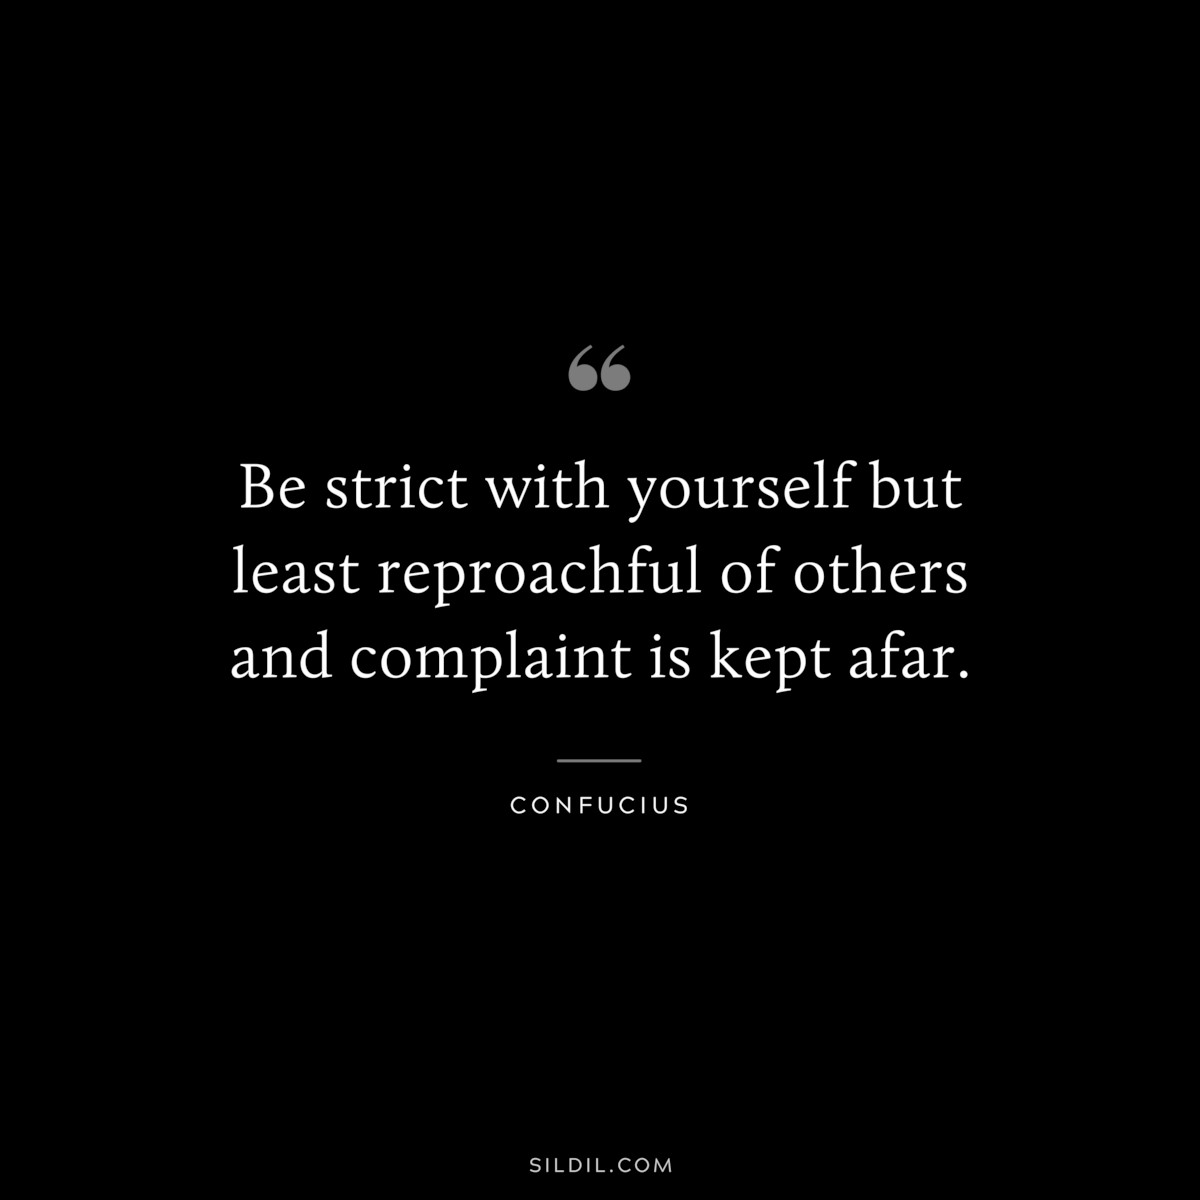 Be strict with yourself but least reproachful of others and complaint is kept afar. ― Confucius